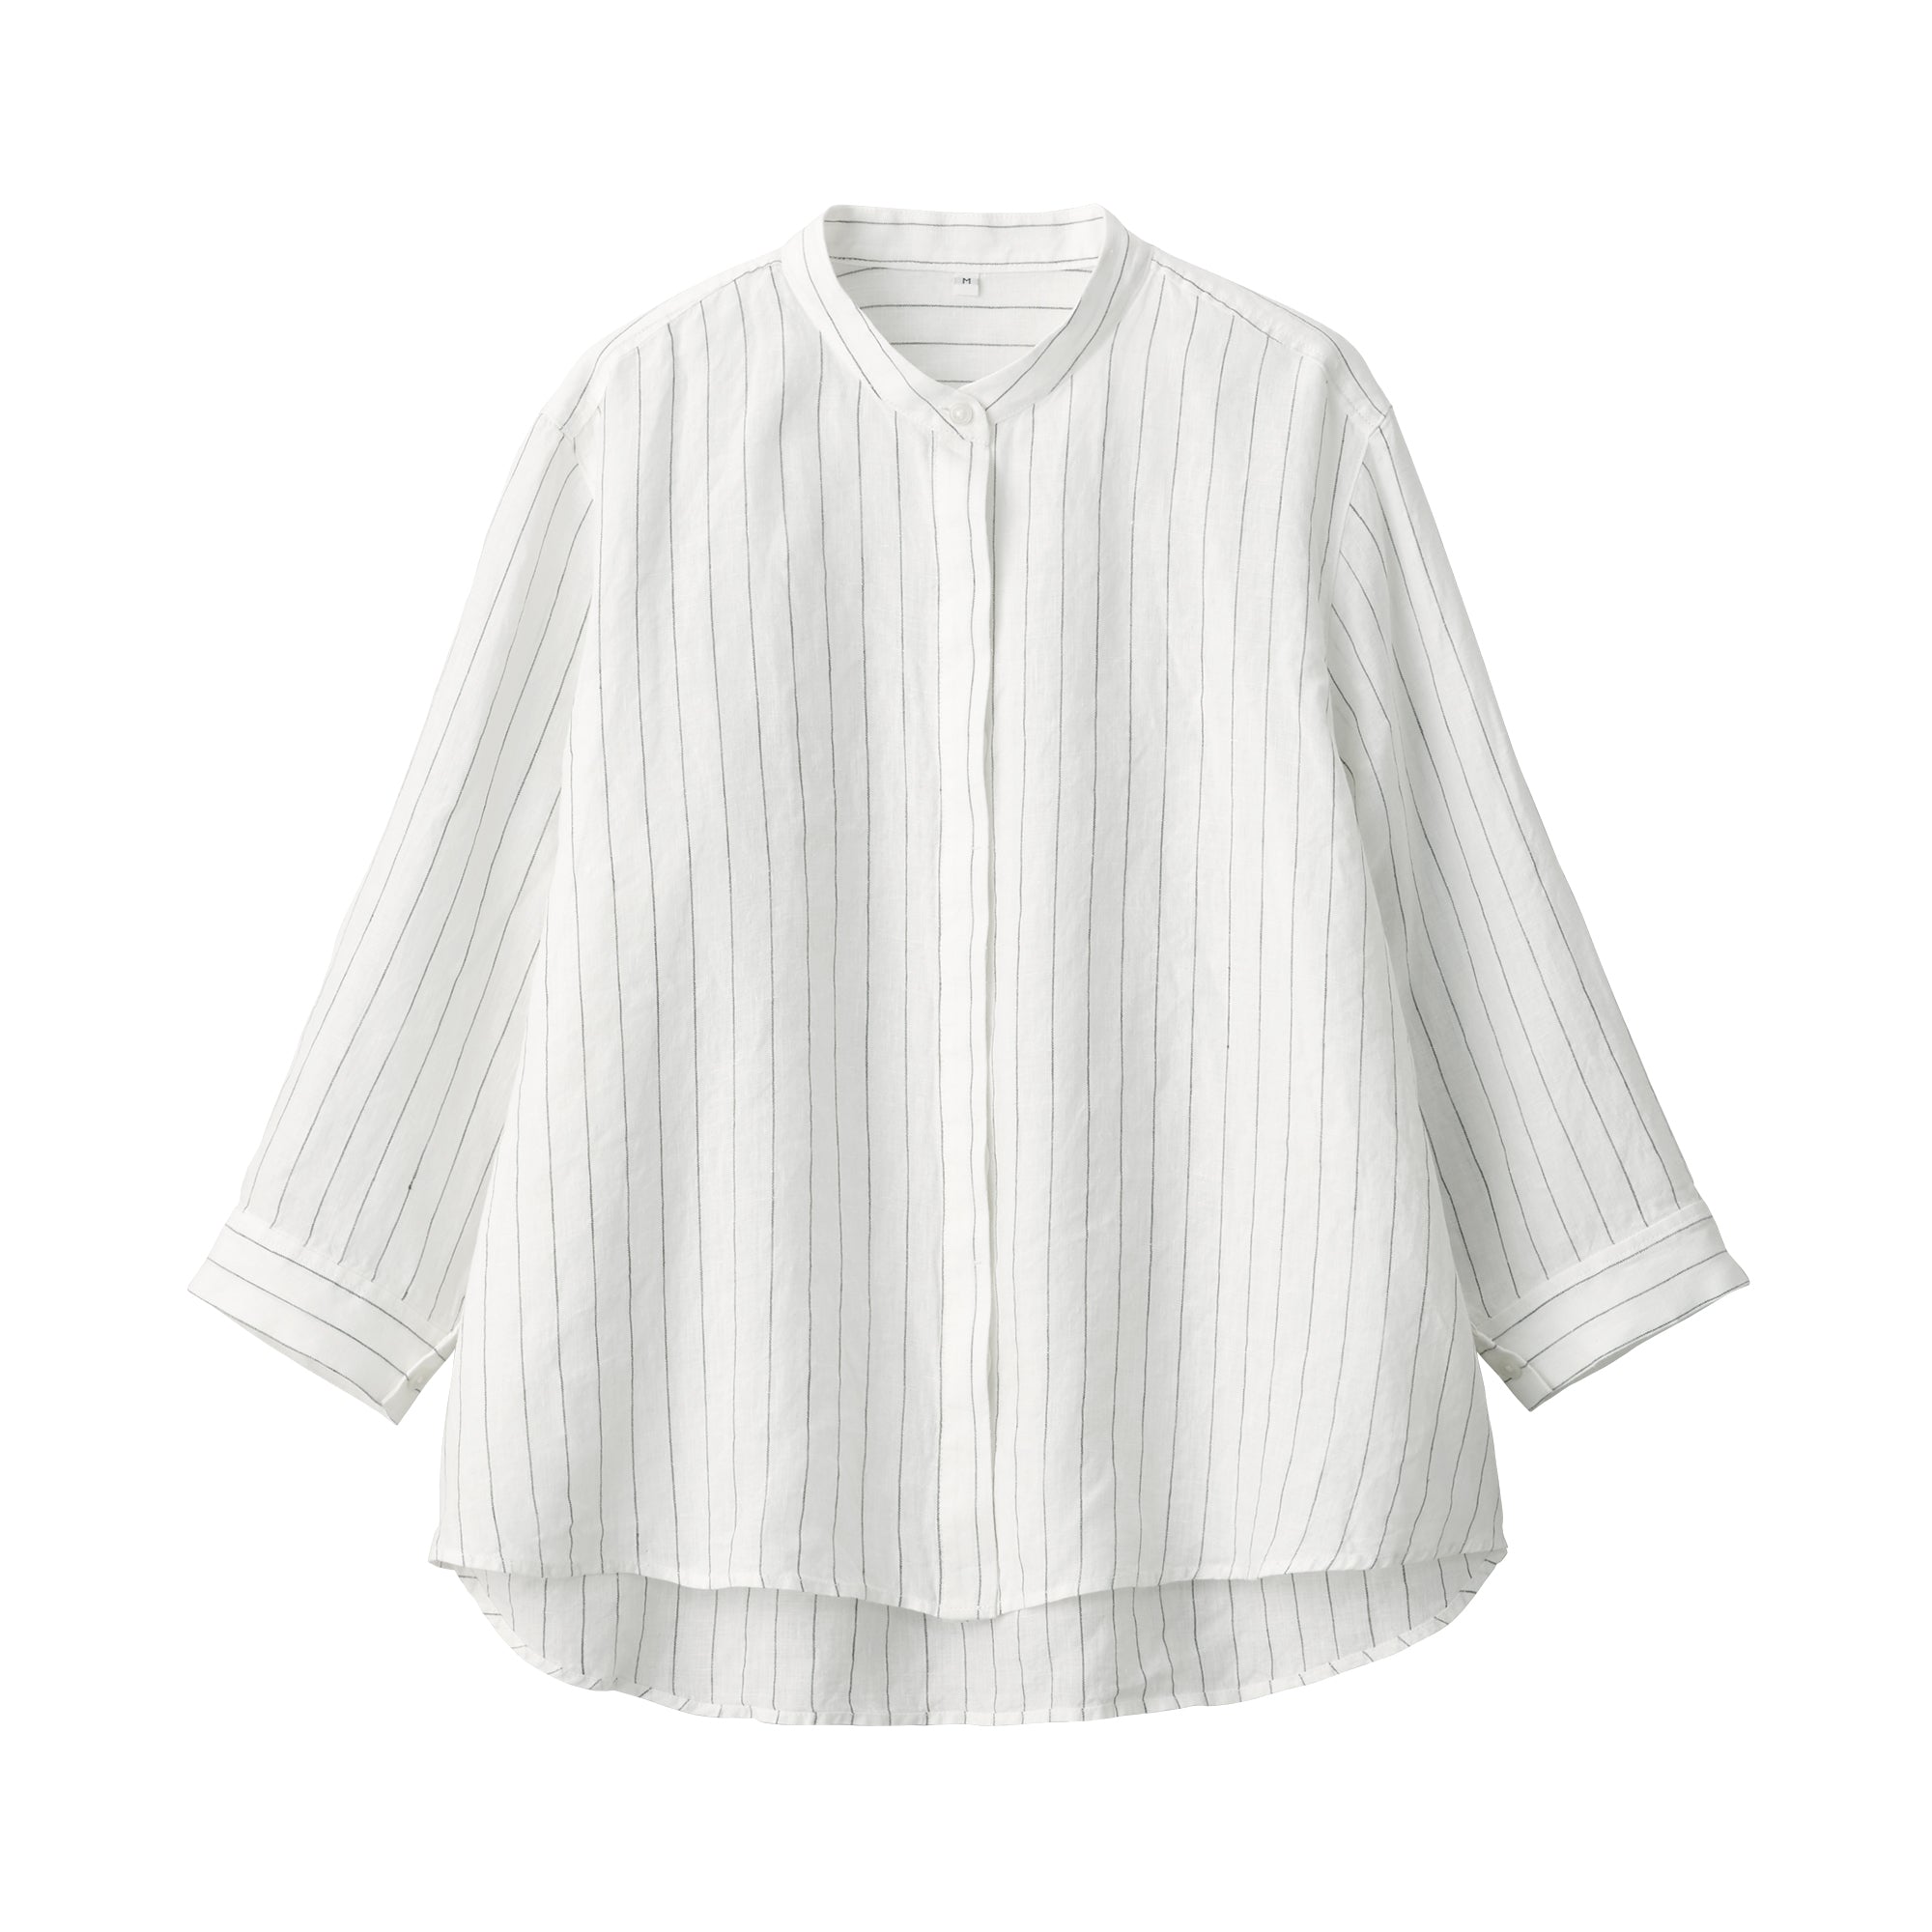 Women's Washed Linen Stand Collar 3/4 Sleeve Striped Blouse